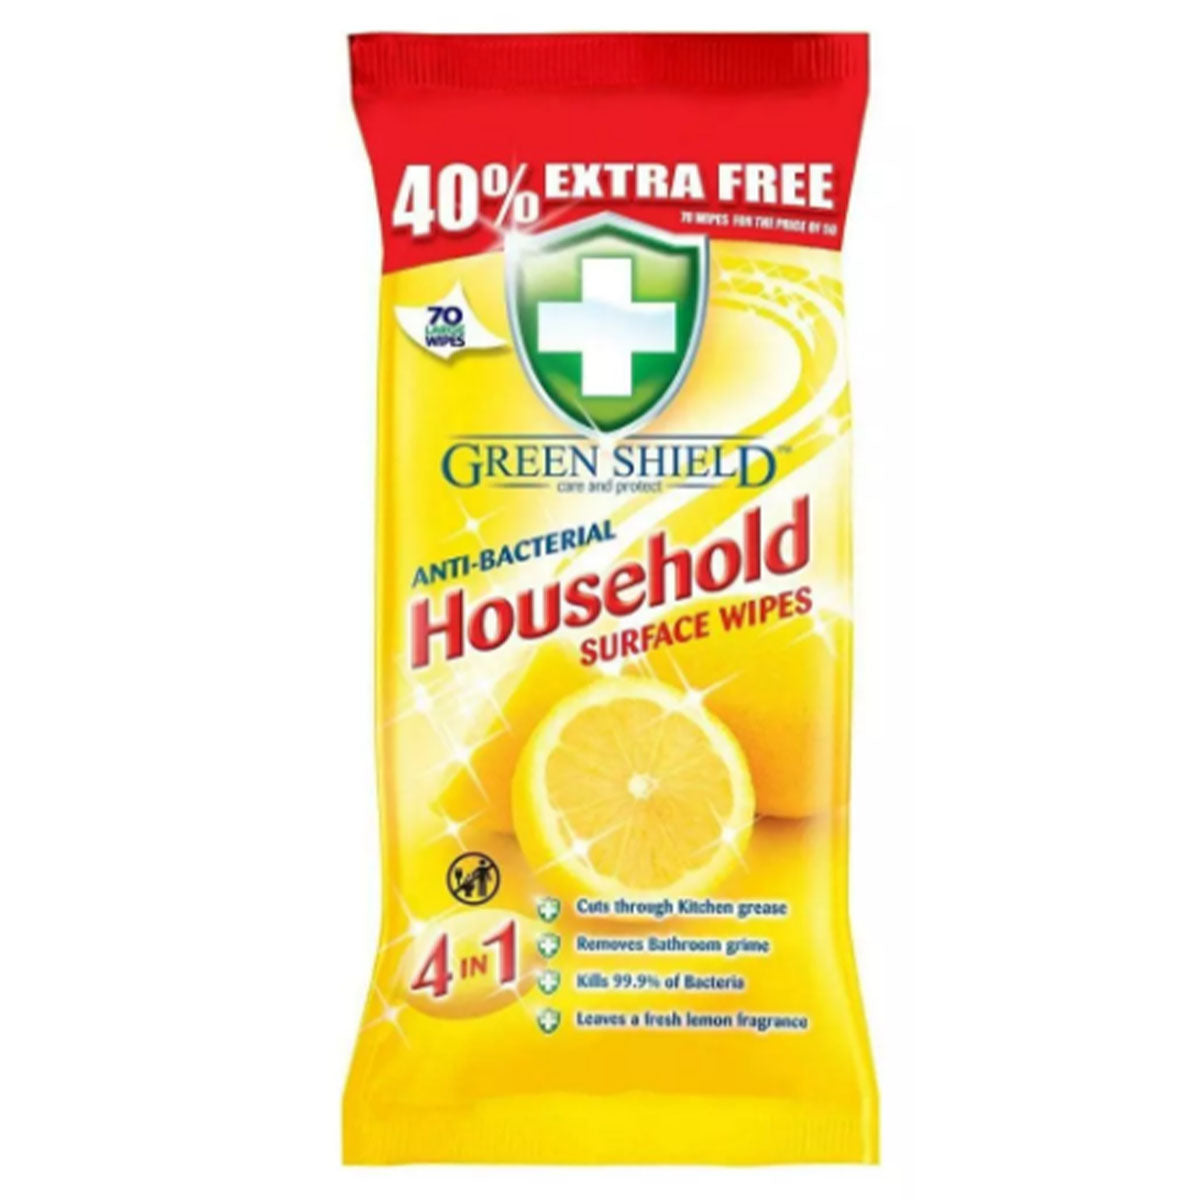 Green Shield - Anti-Bacterial Household Surface Wipes - 70pcs - Continental Food Store